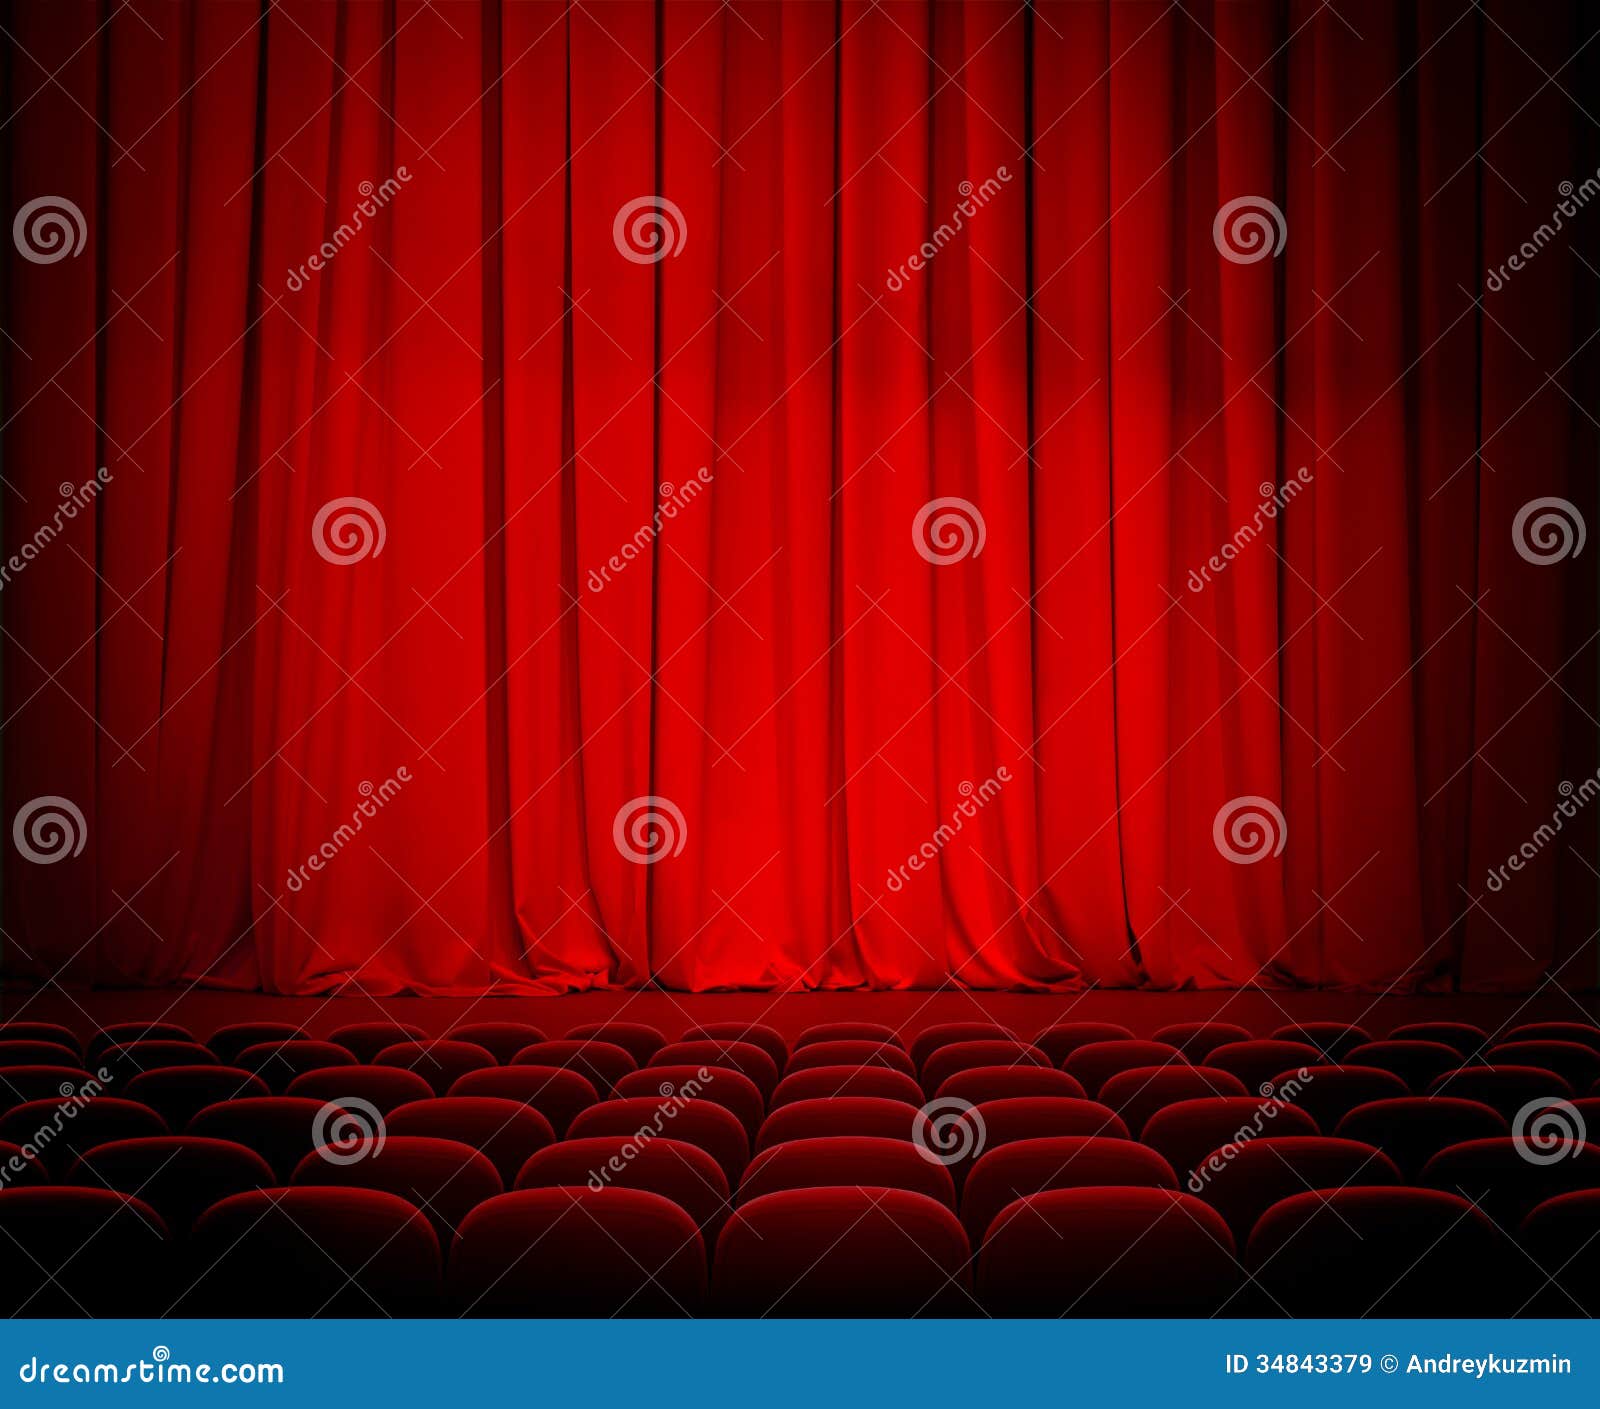 theater red curtains and seats